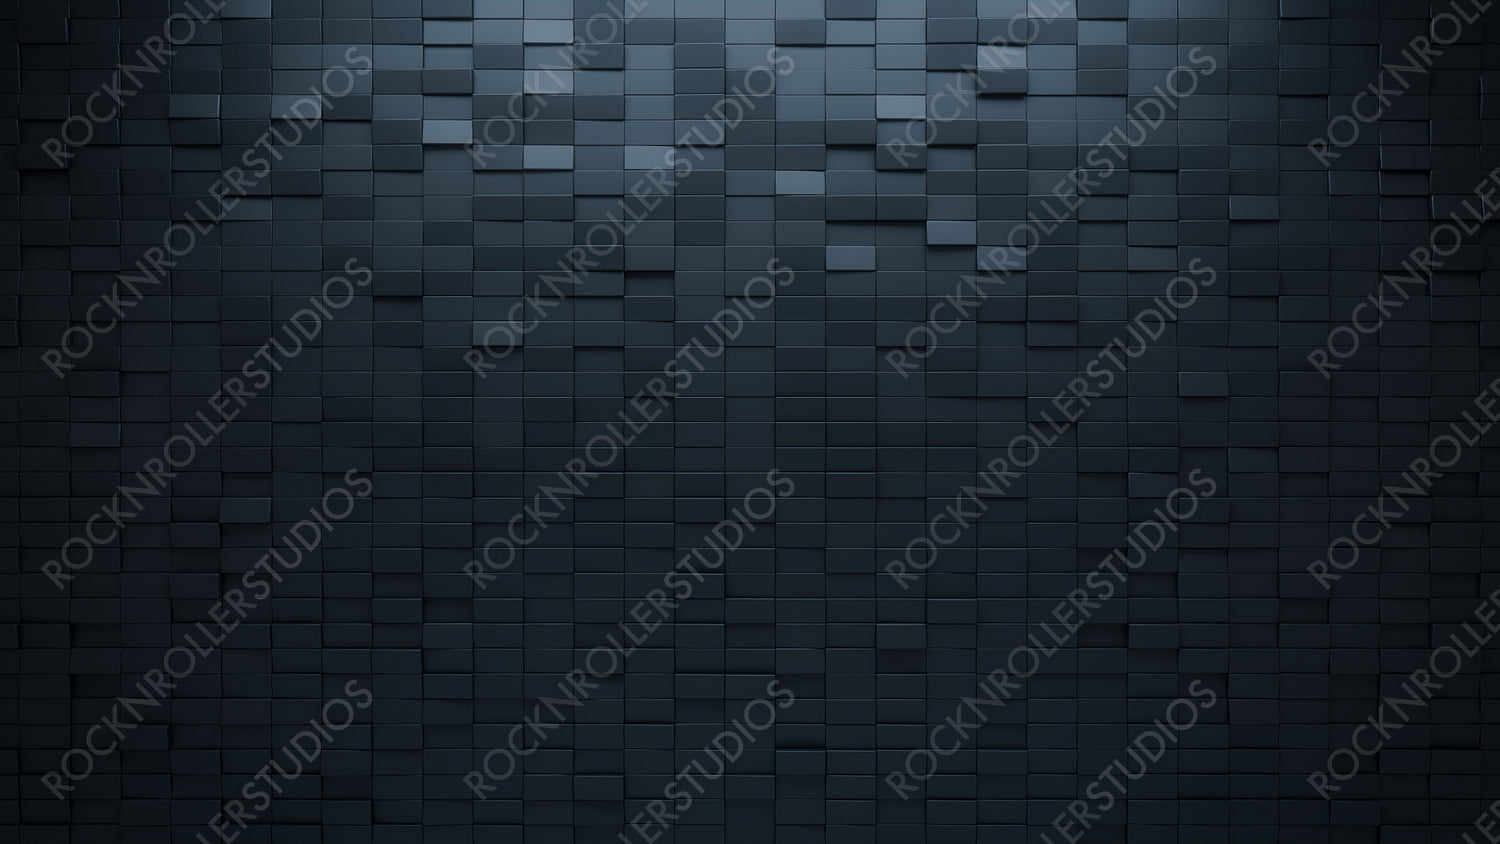 Semigloss Tiles arranged to create a Black wall. Futuristic, 3D Background formed from Rectangular blocks. 3D Render